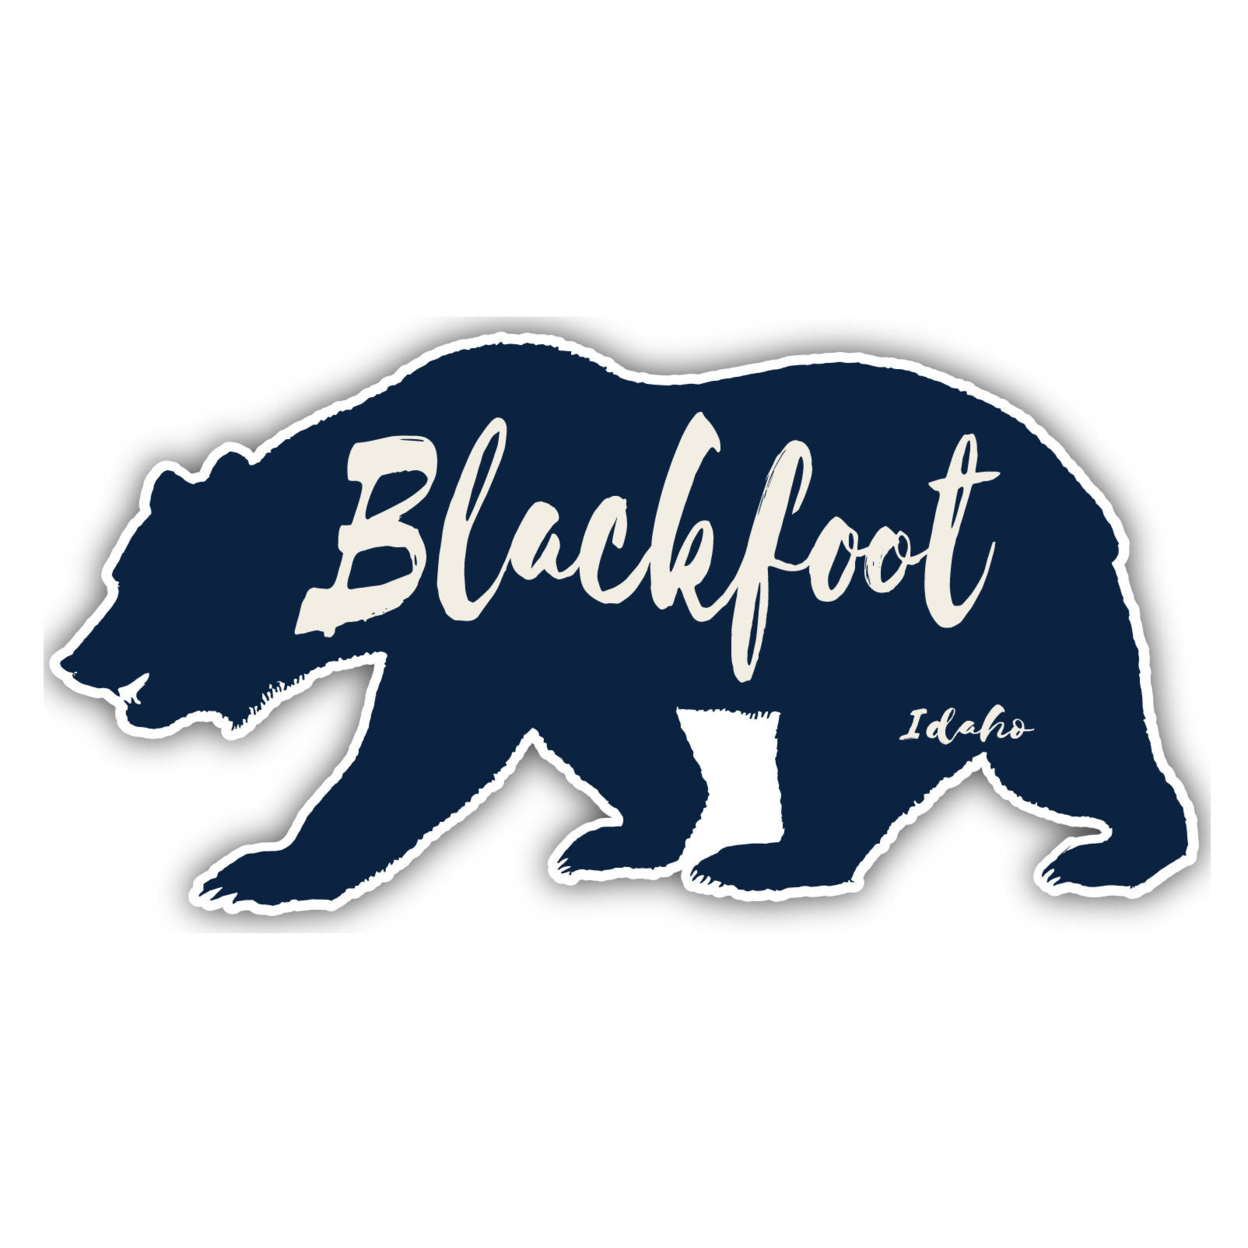 Blackfoot Idaho Souvenir Decorative Stickers (Choose Theme And Size) - 4-Pack, 10-Inch, Camp Life